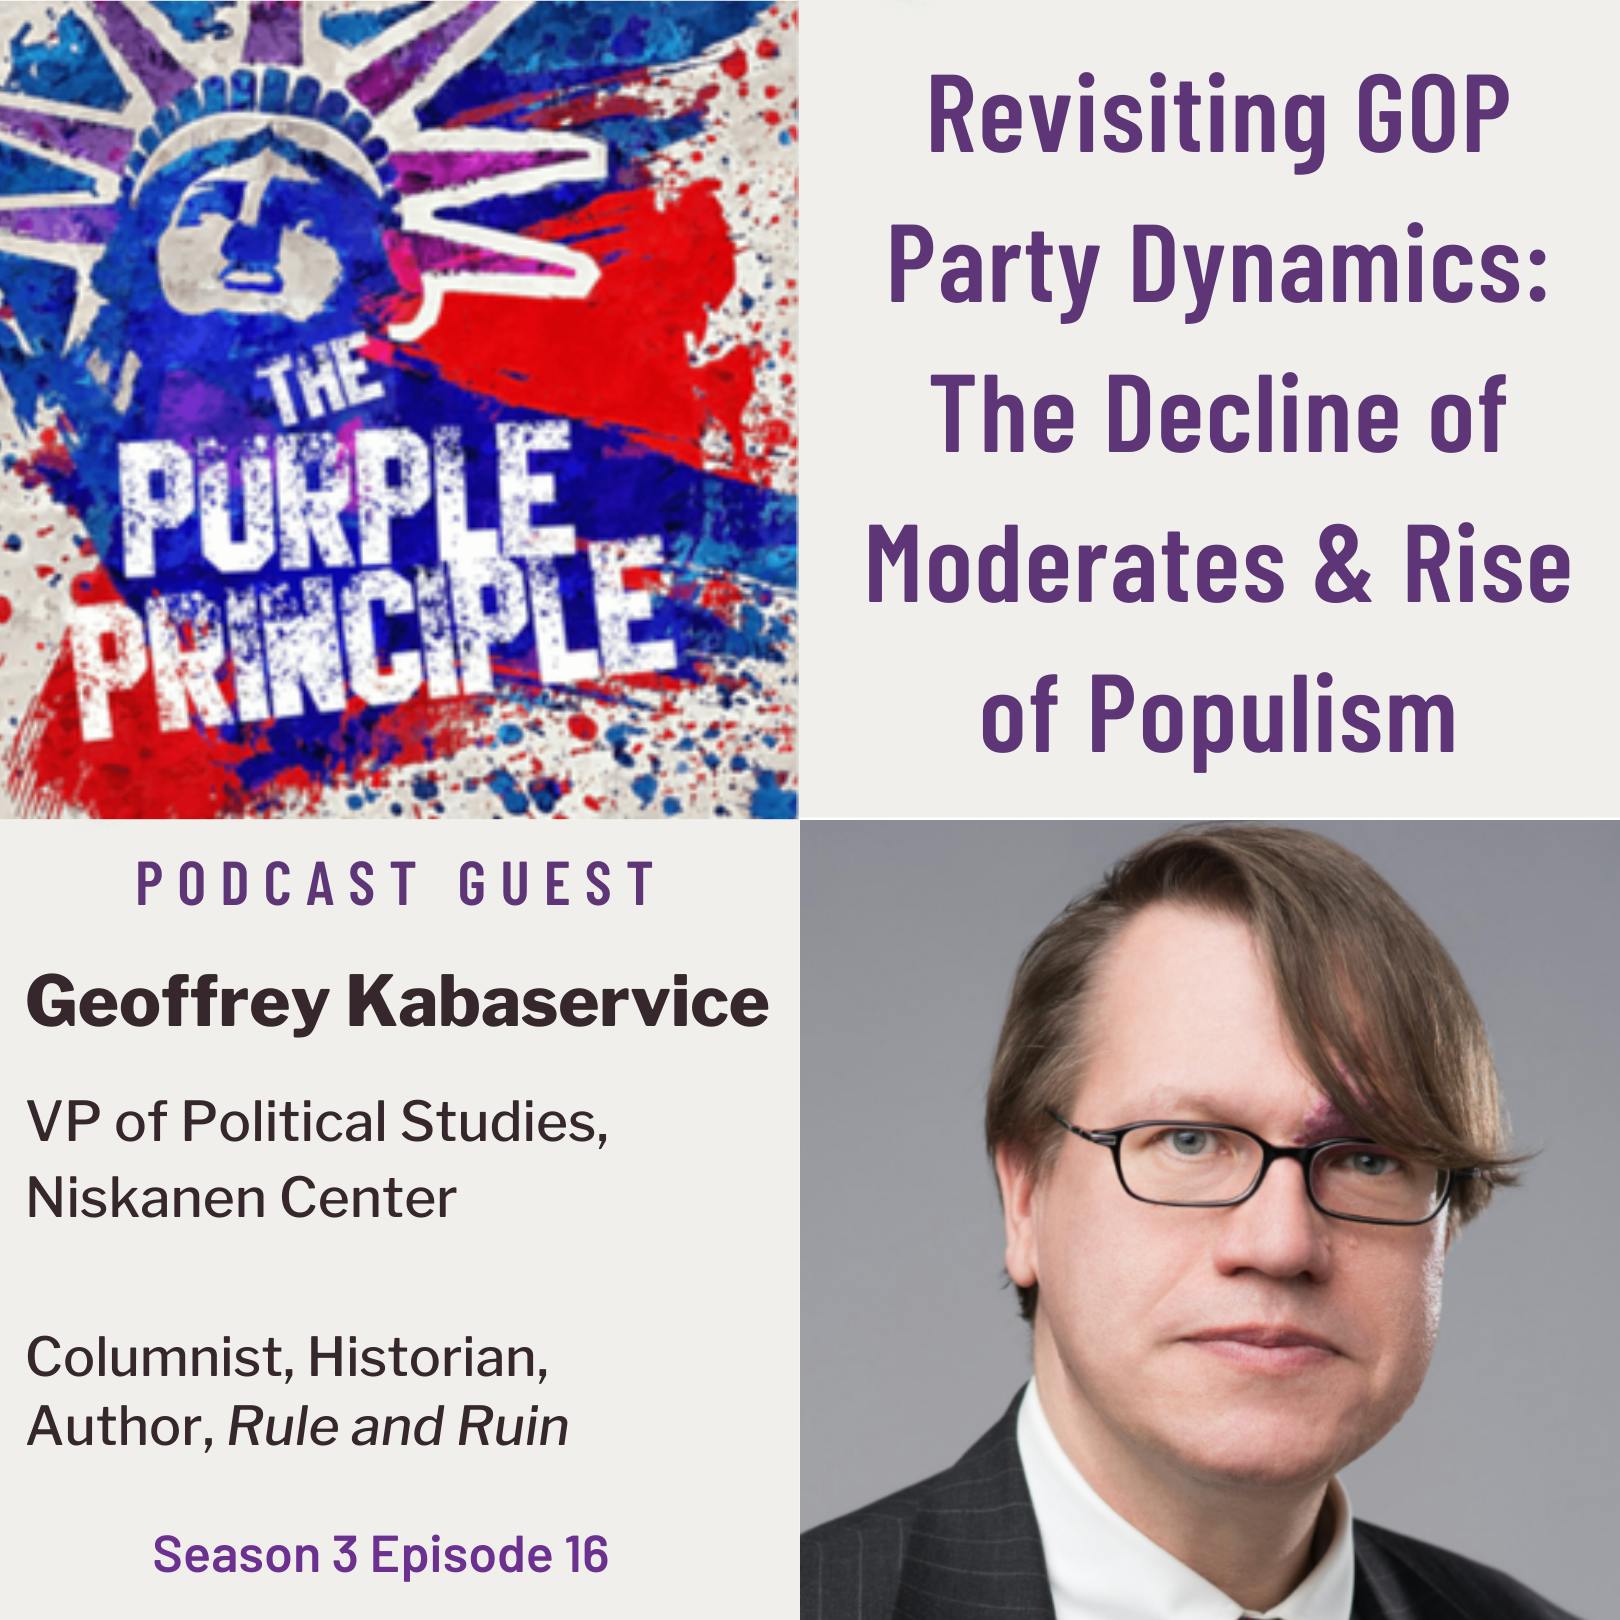 Revisiting GOP Party Dynamics: The Decline of Moderates & Rise of Populism